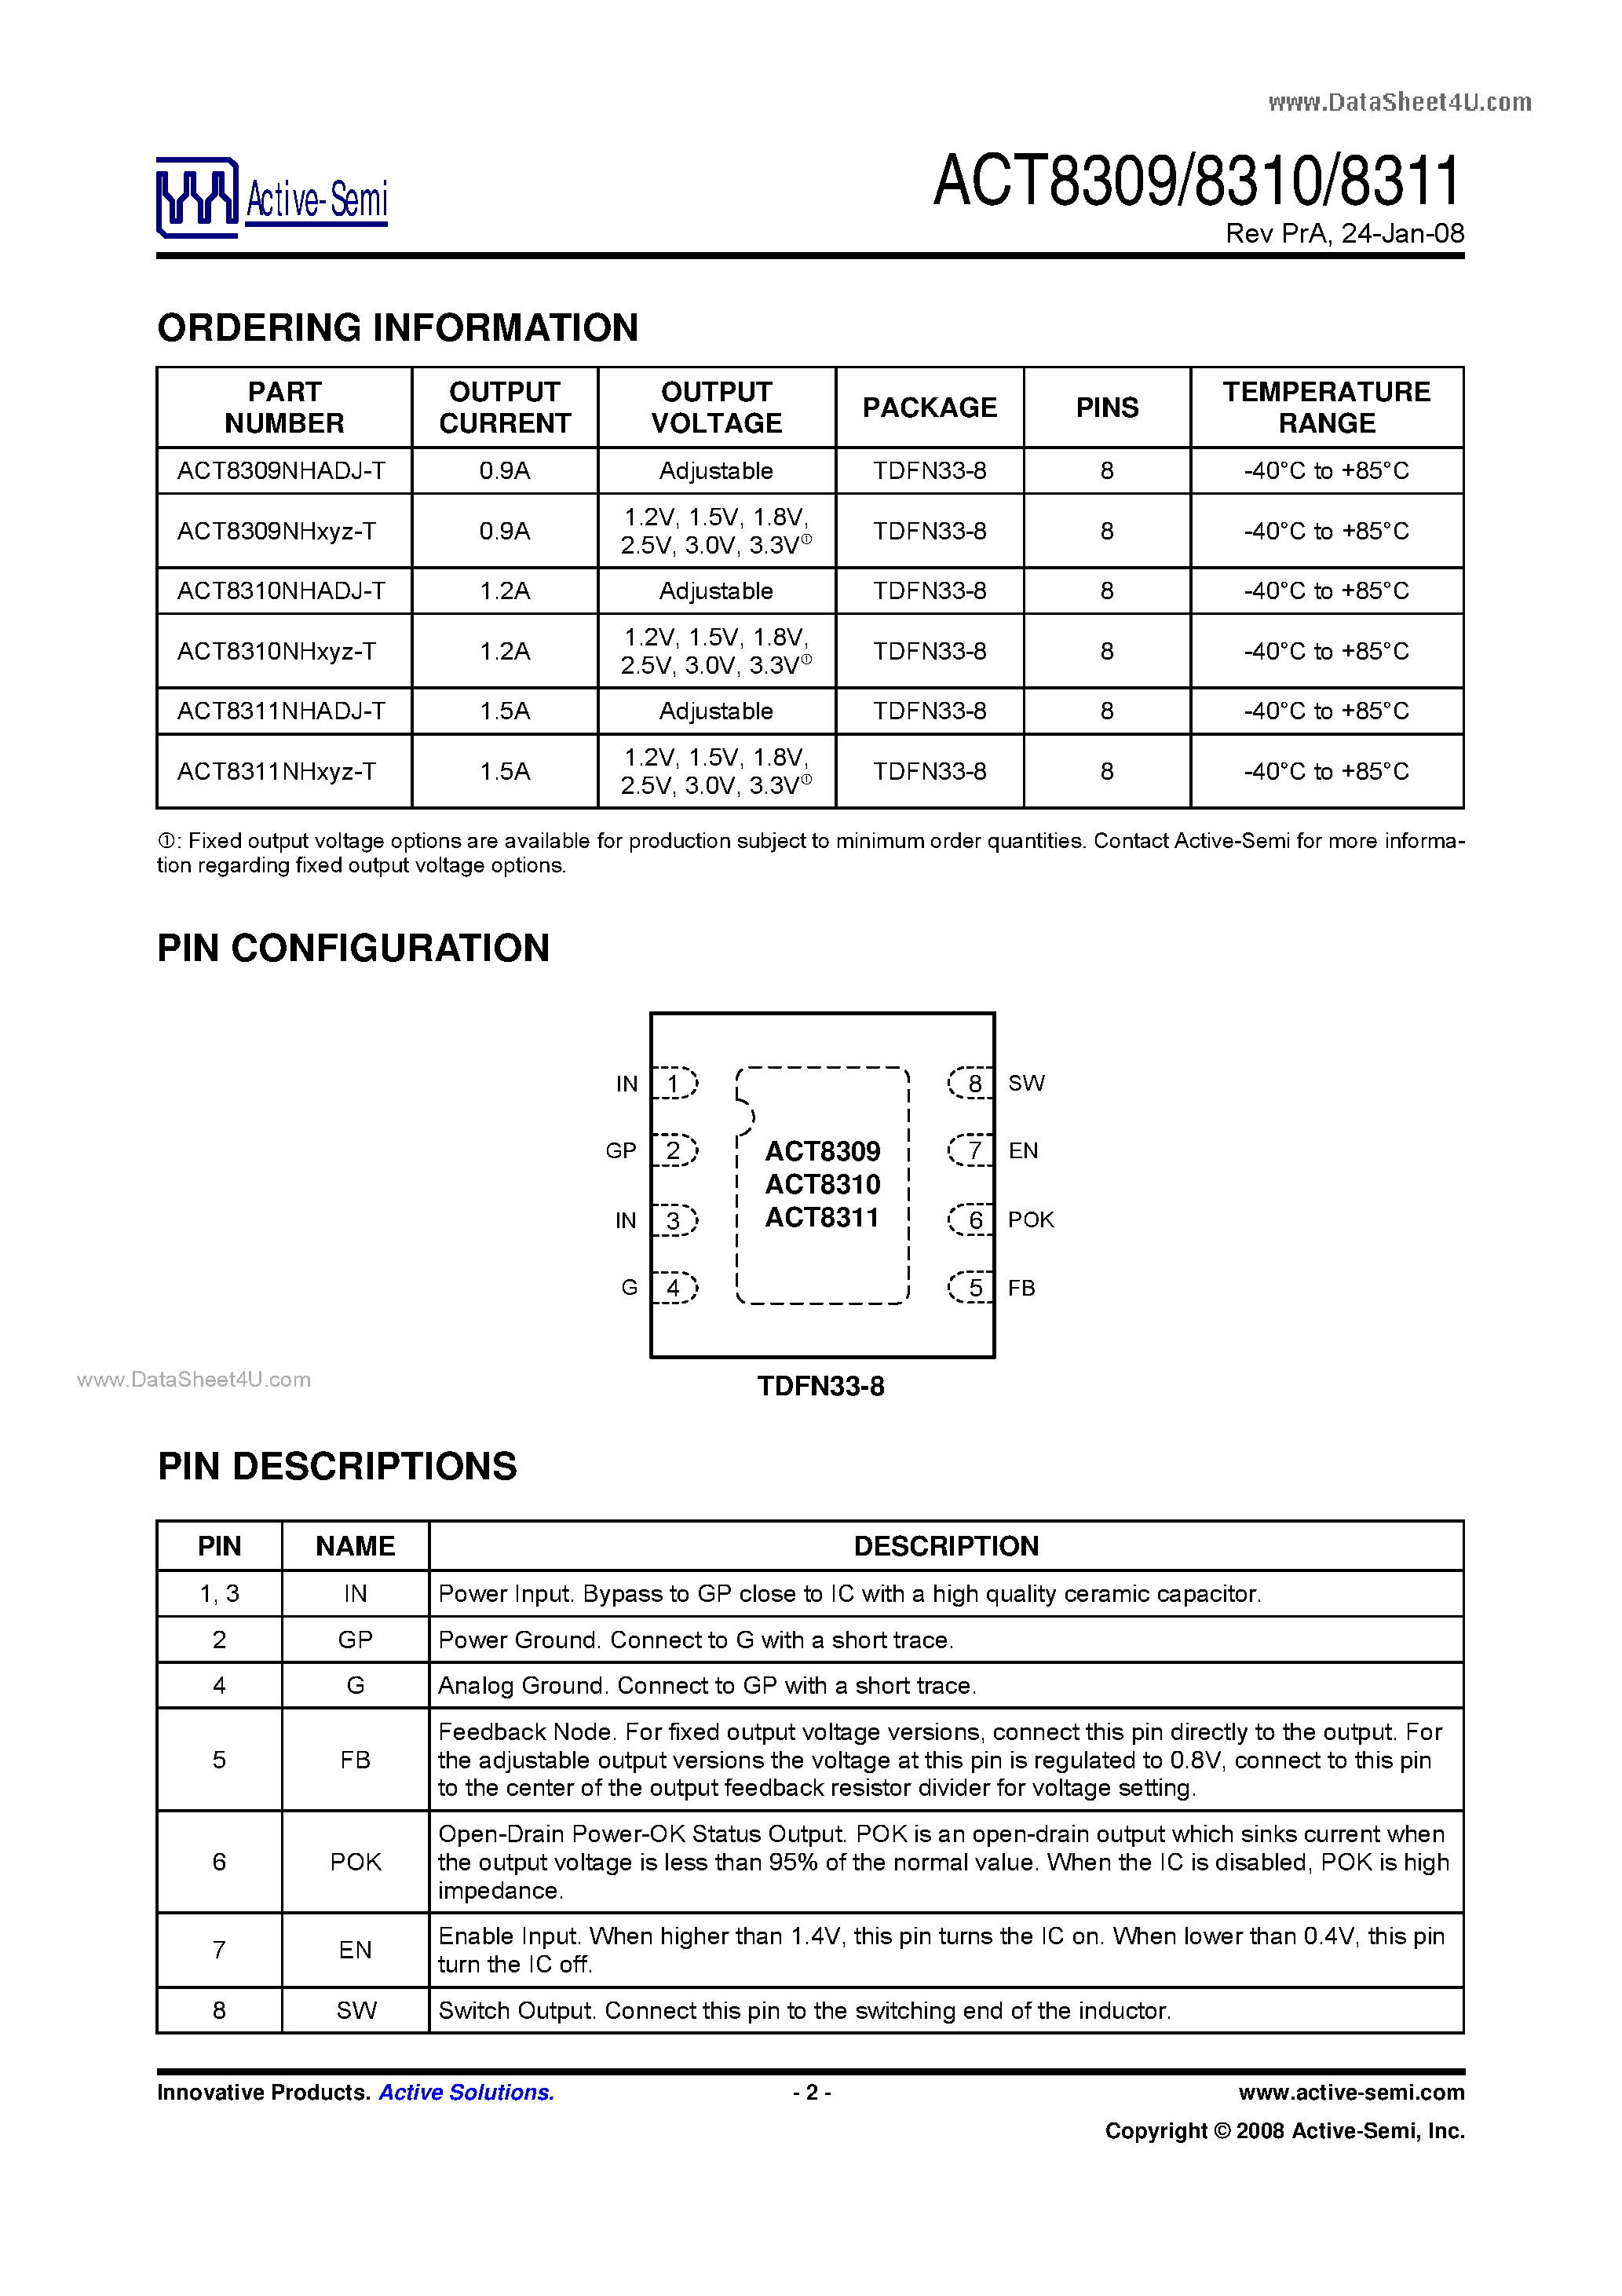 Datasheet ACT8310 - (ACT8309 - ACT8311) PWM Step-Down DC/DCs page 2